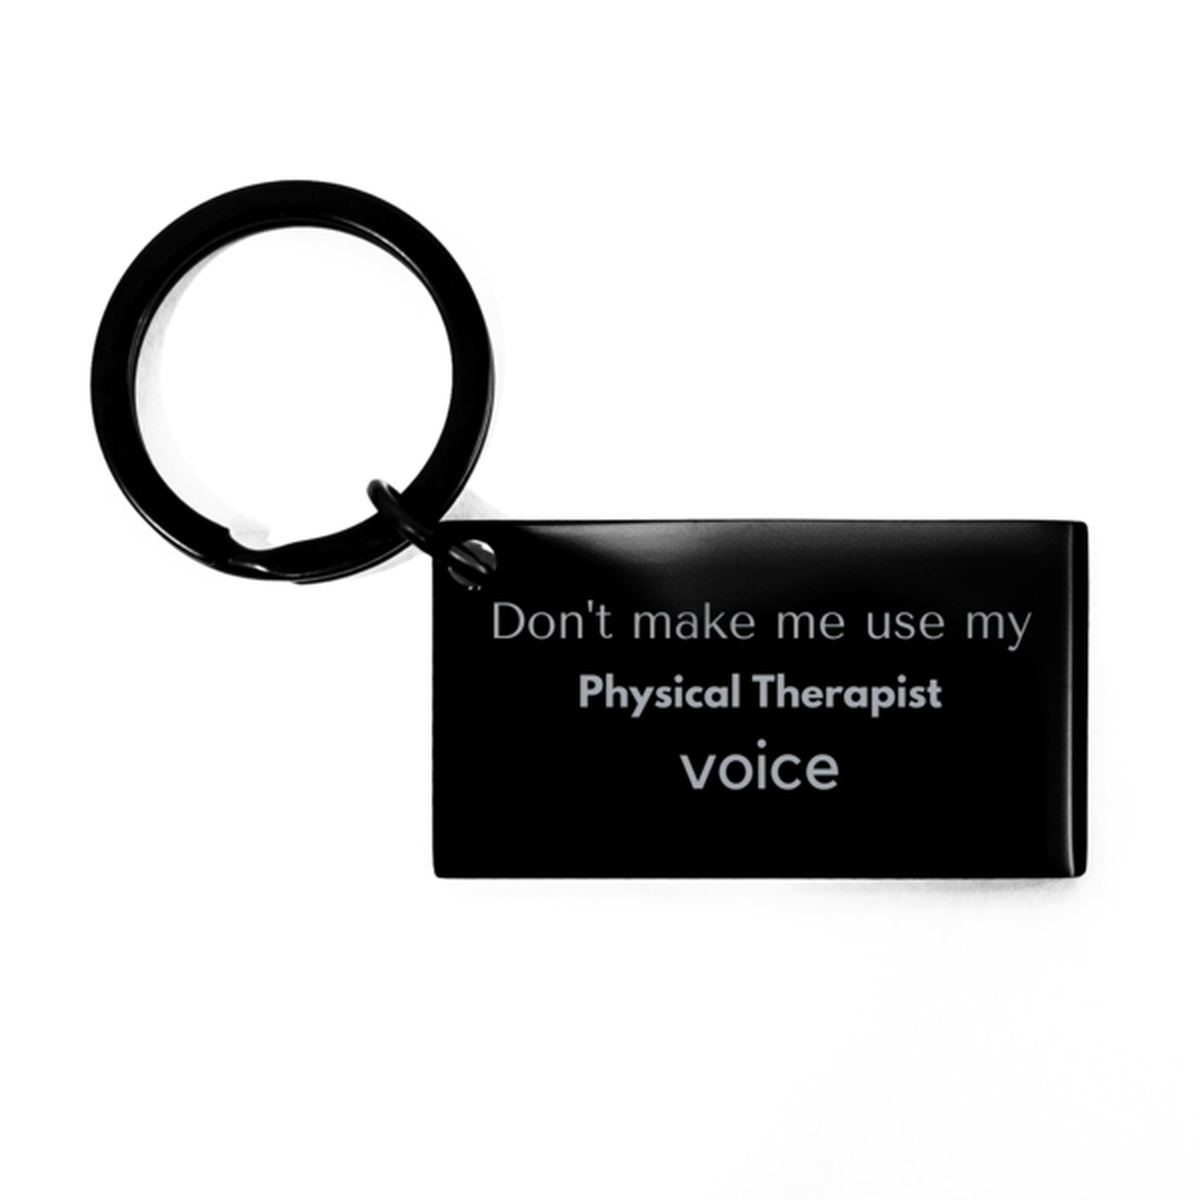 Don't make me use my Physical Therapist voice, Sarcasm Physical Therapist Gifts, Christmas Physical Therapist Keychain Birthday Unique Gifts For Physical Therapist Coworkers, Men, Women, Colleague, Friends